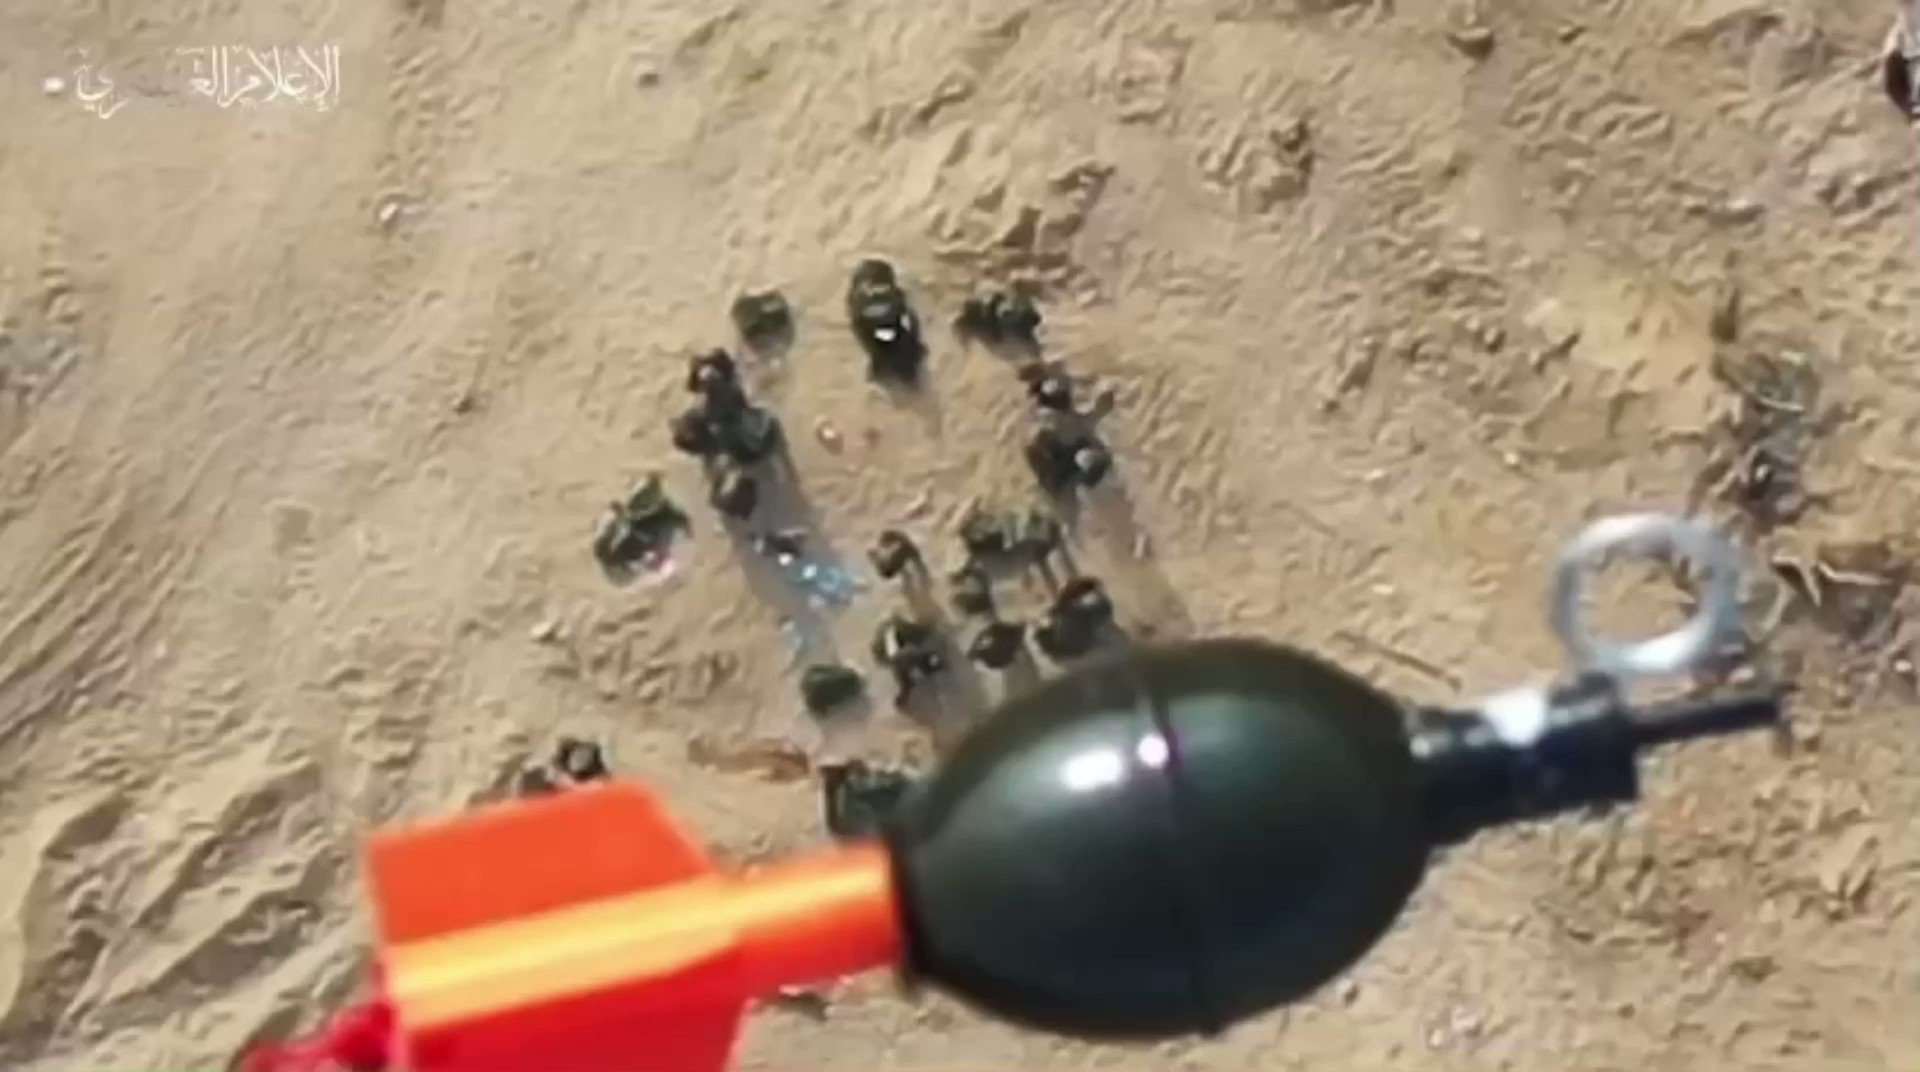 Bosni on X: Qassam drone drops a grenade over a group of iOF